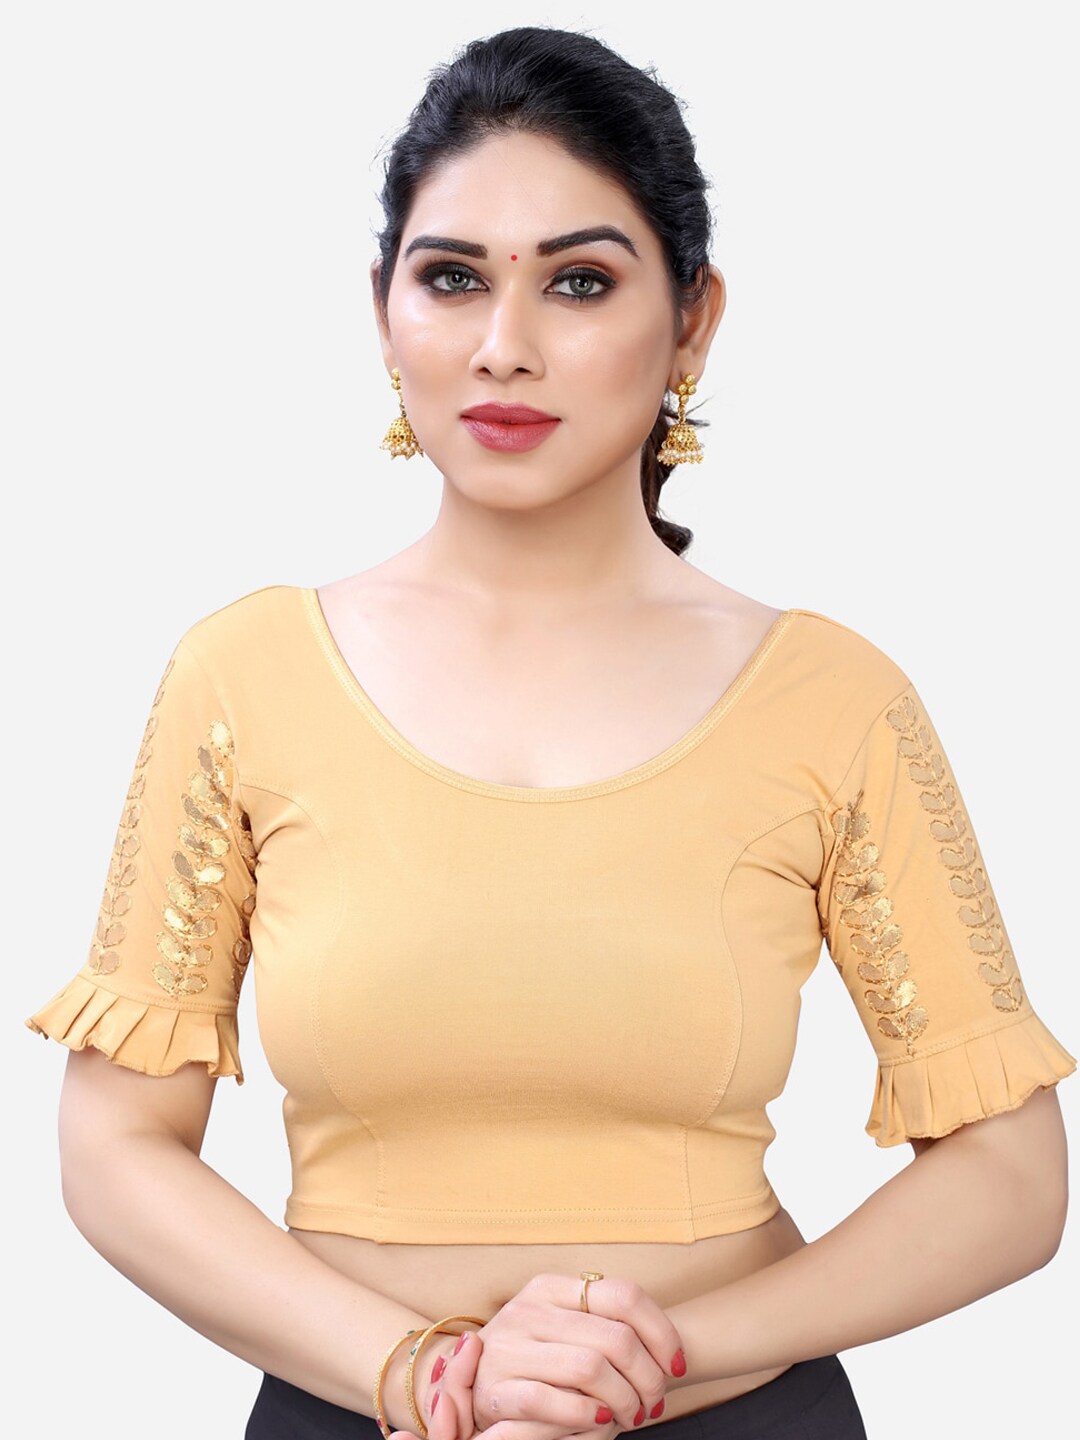 SIRIL Cream Embroidered Saree Blouse Price in India